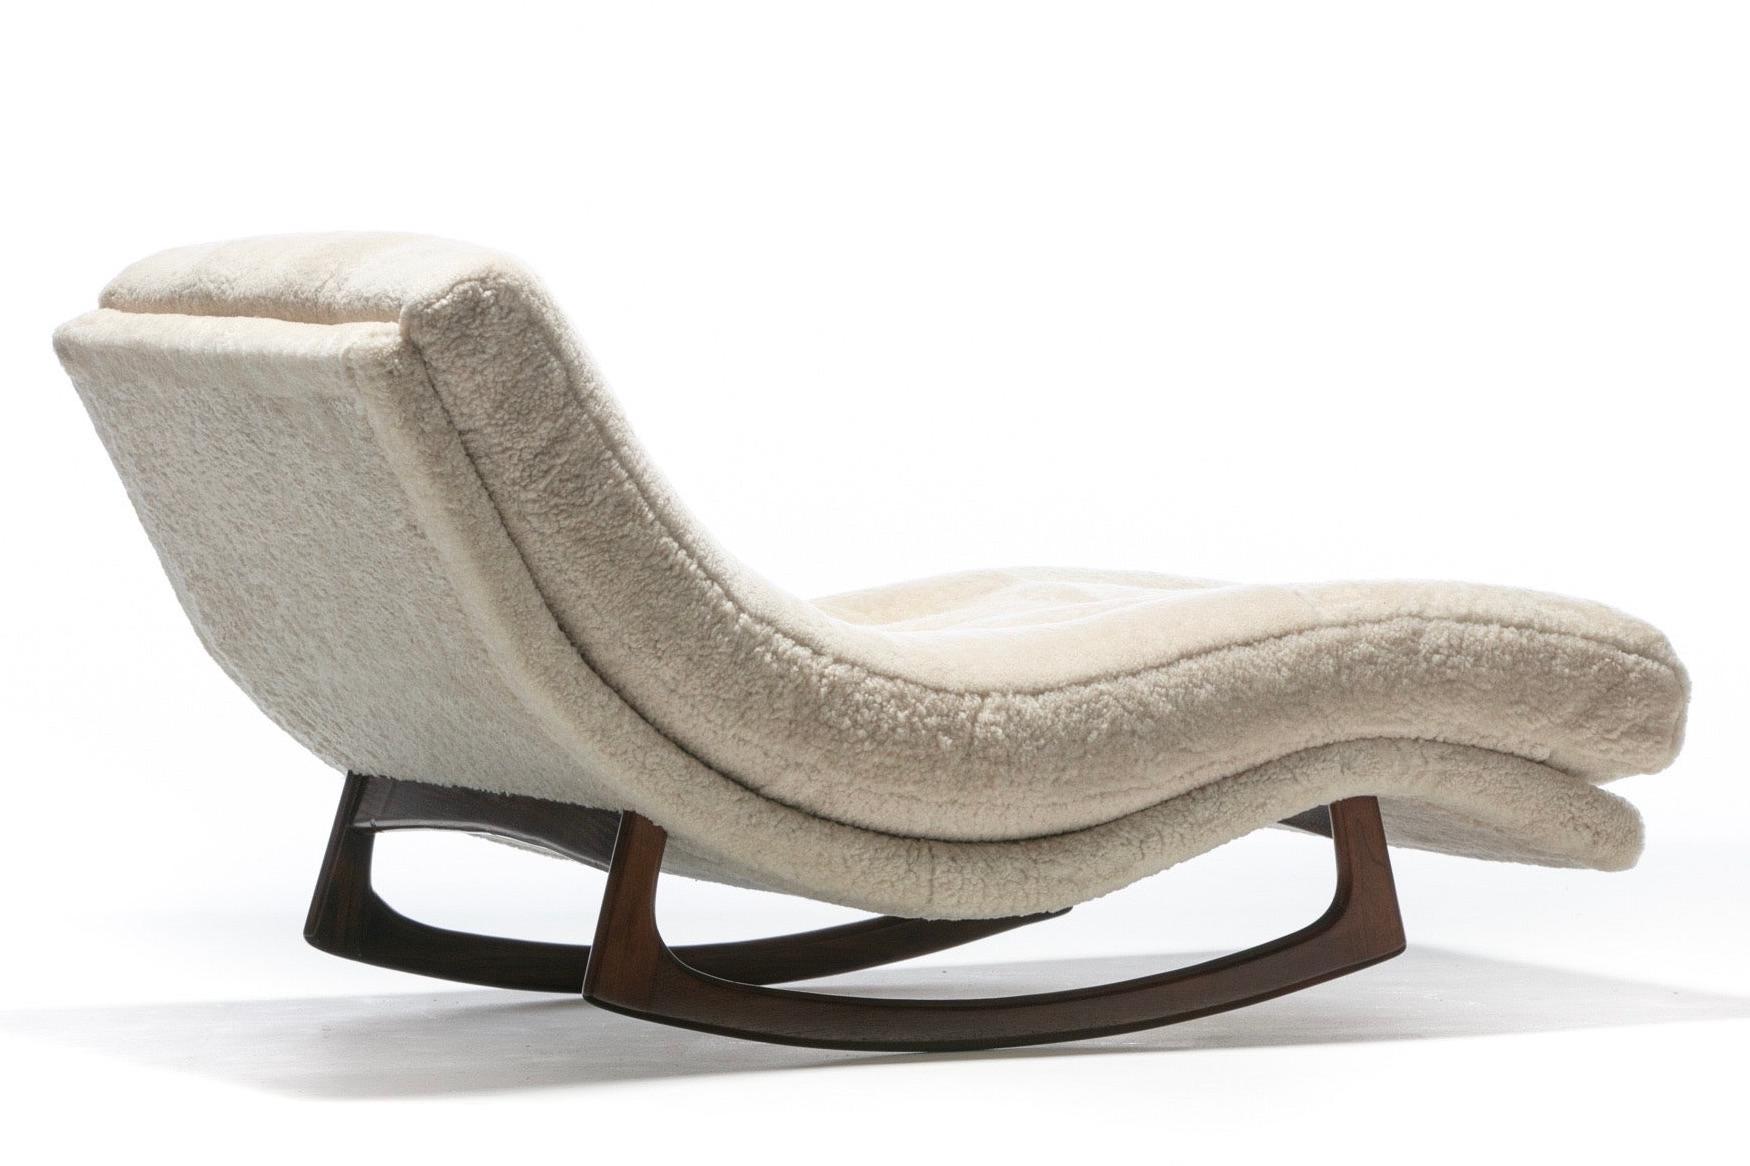 Adrian Pearsall Waive Chaise Rocker Lounge in Ivory Shearling with Walnut Legs 2